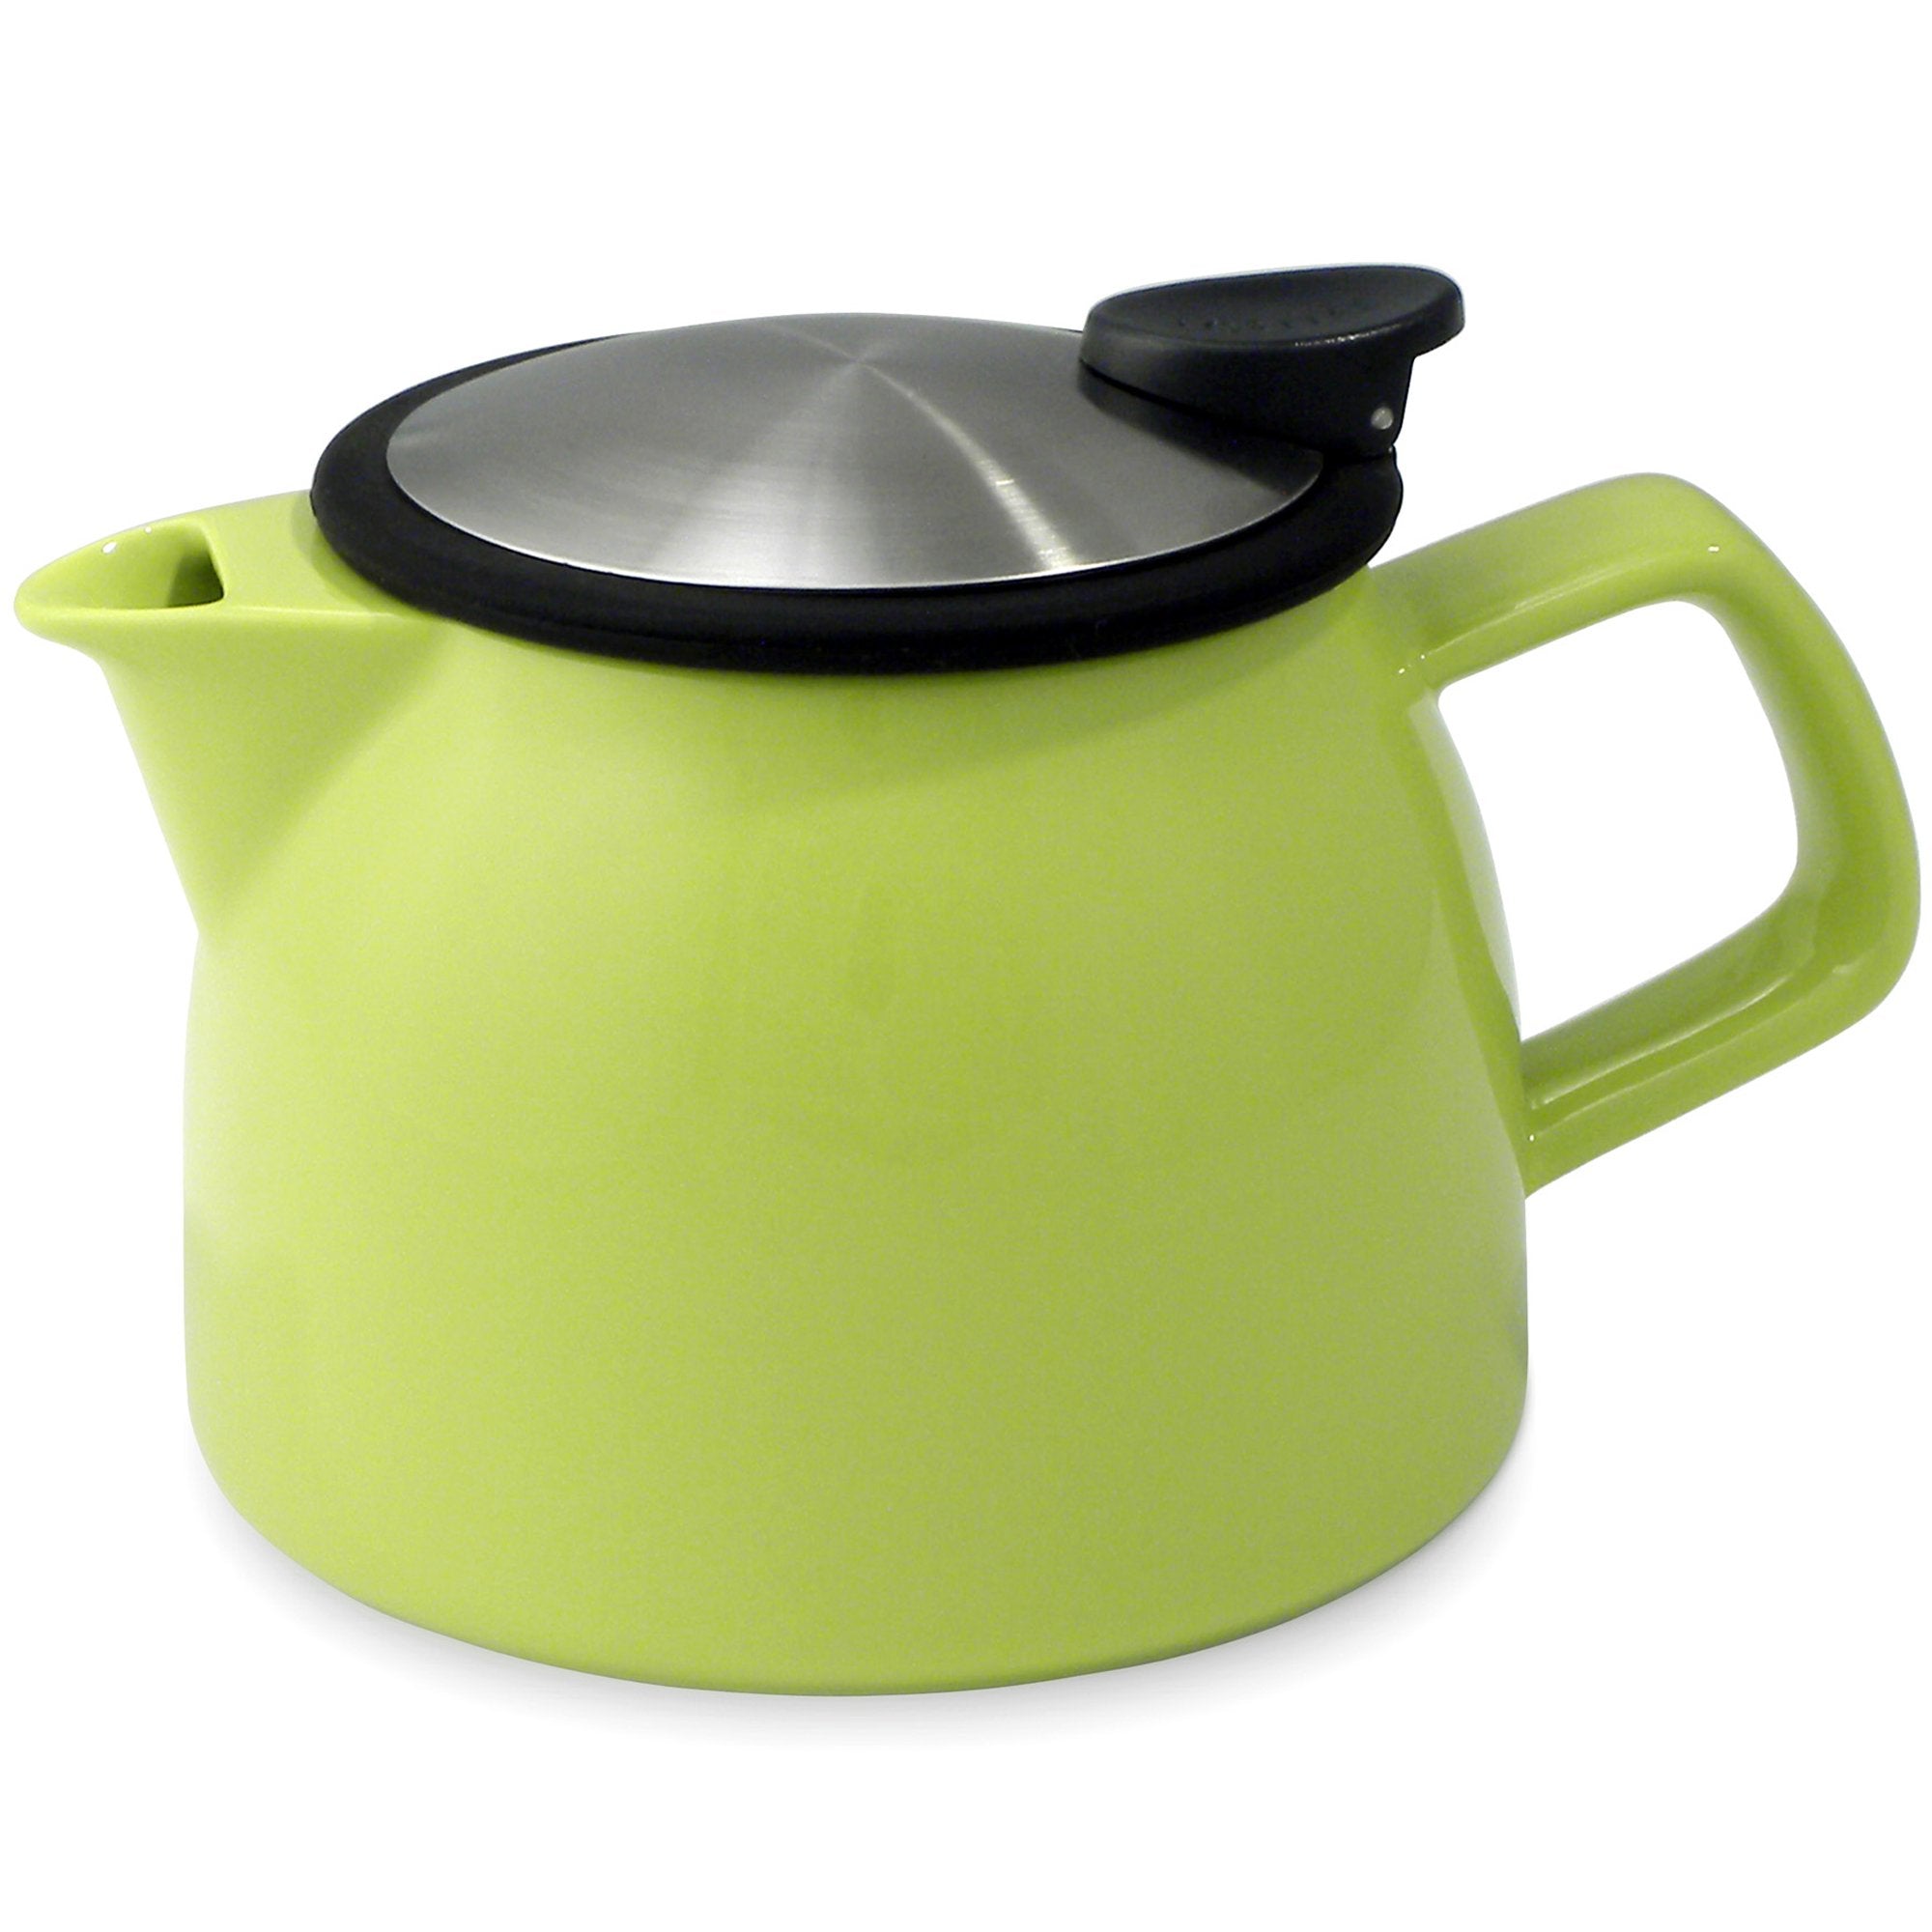 Tealula 16 oz bell-shaped Lime Green teapot with square handle and black and silver detachable push-on-lid